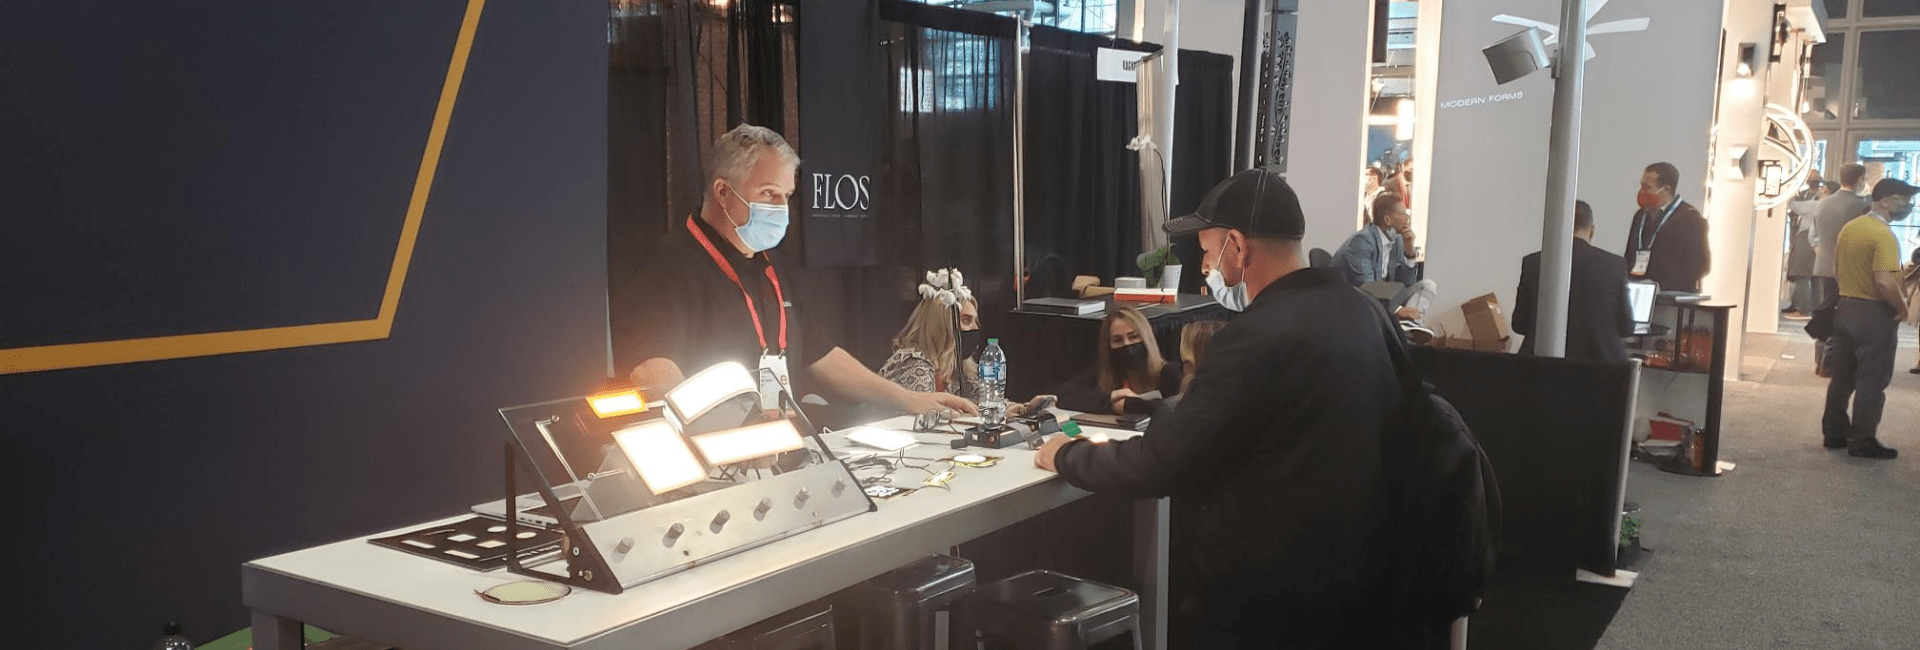 Lighting Community Reconnects at LightFair 2021 and Explores OLED Technology at OLEDWorks Booth